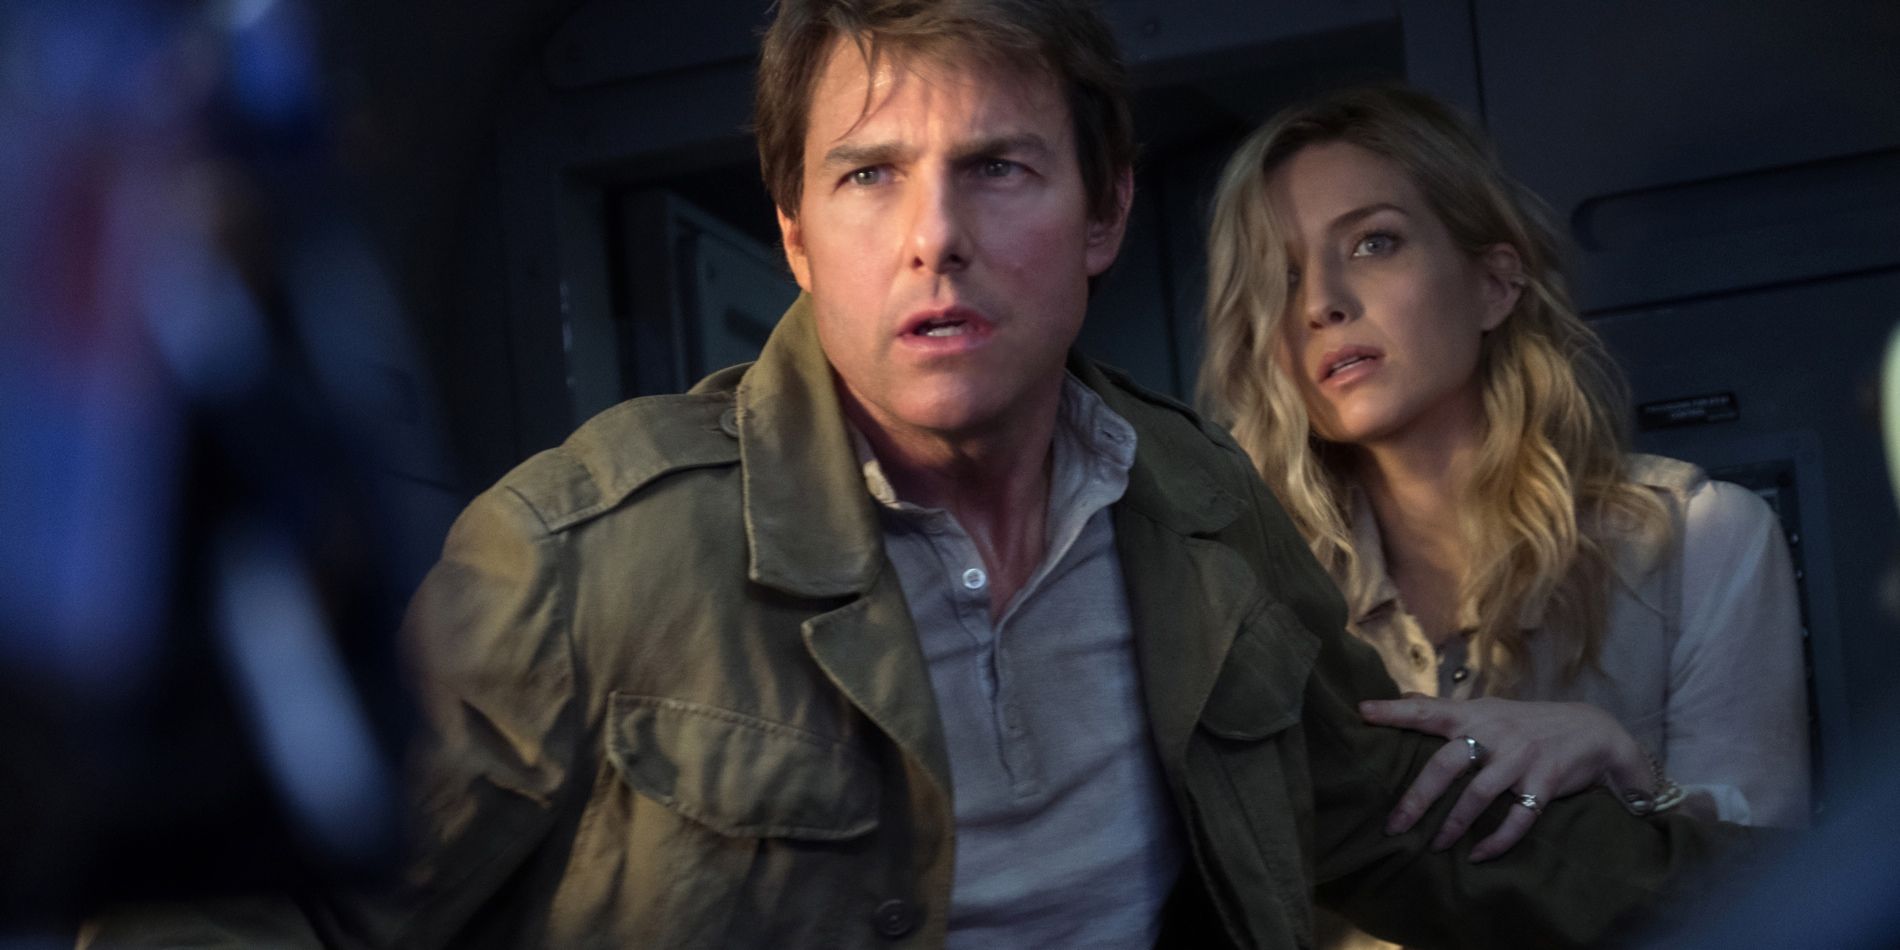 5 Reasons Why The Mummy 2017 Isn’t As Bad As People Say It Is (& 5 Reasons It Is)